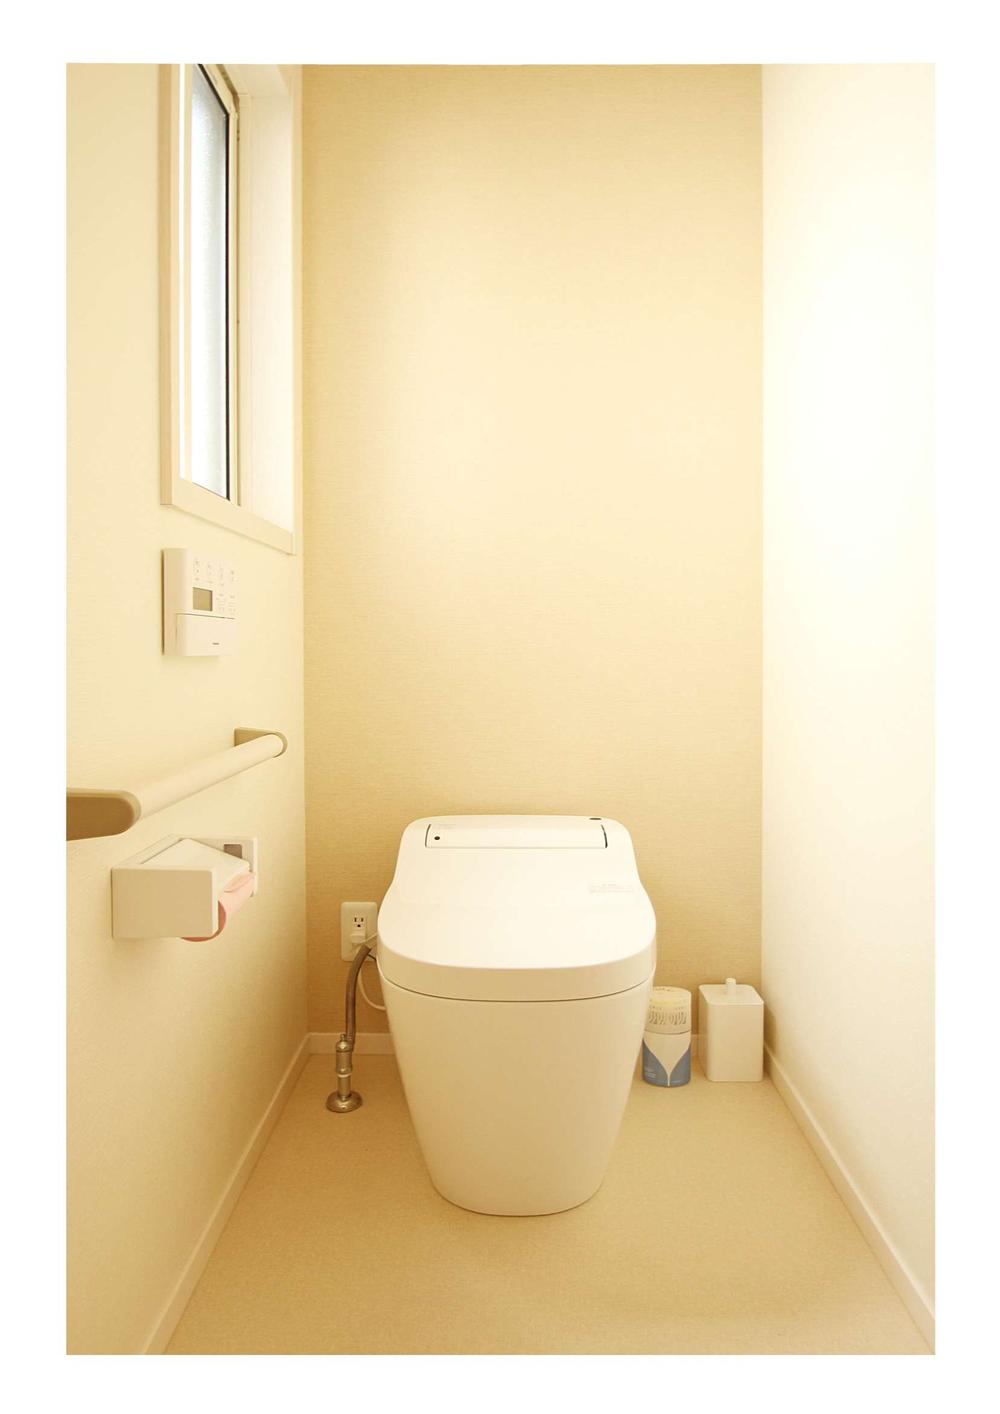 Toilet. First floor toilet: Panasonic fully automatic cleaning toilet